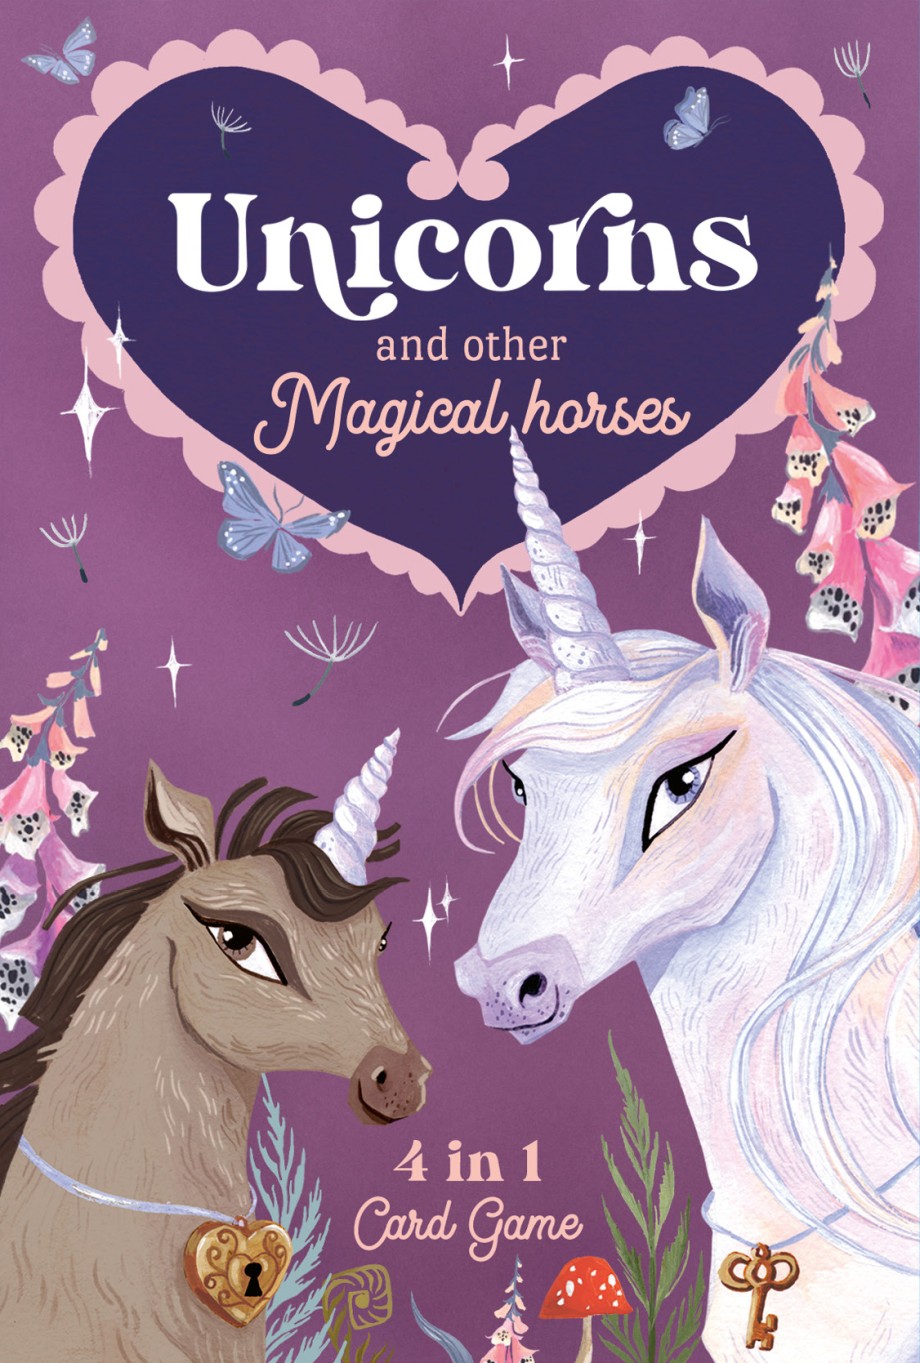 Unicorns & Other Magical Horses: 4 in 1 Card Game Enjoy 4 Classic Games in 1 With These Beautifully Illustrated Cards